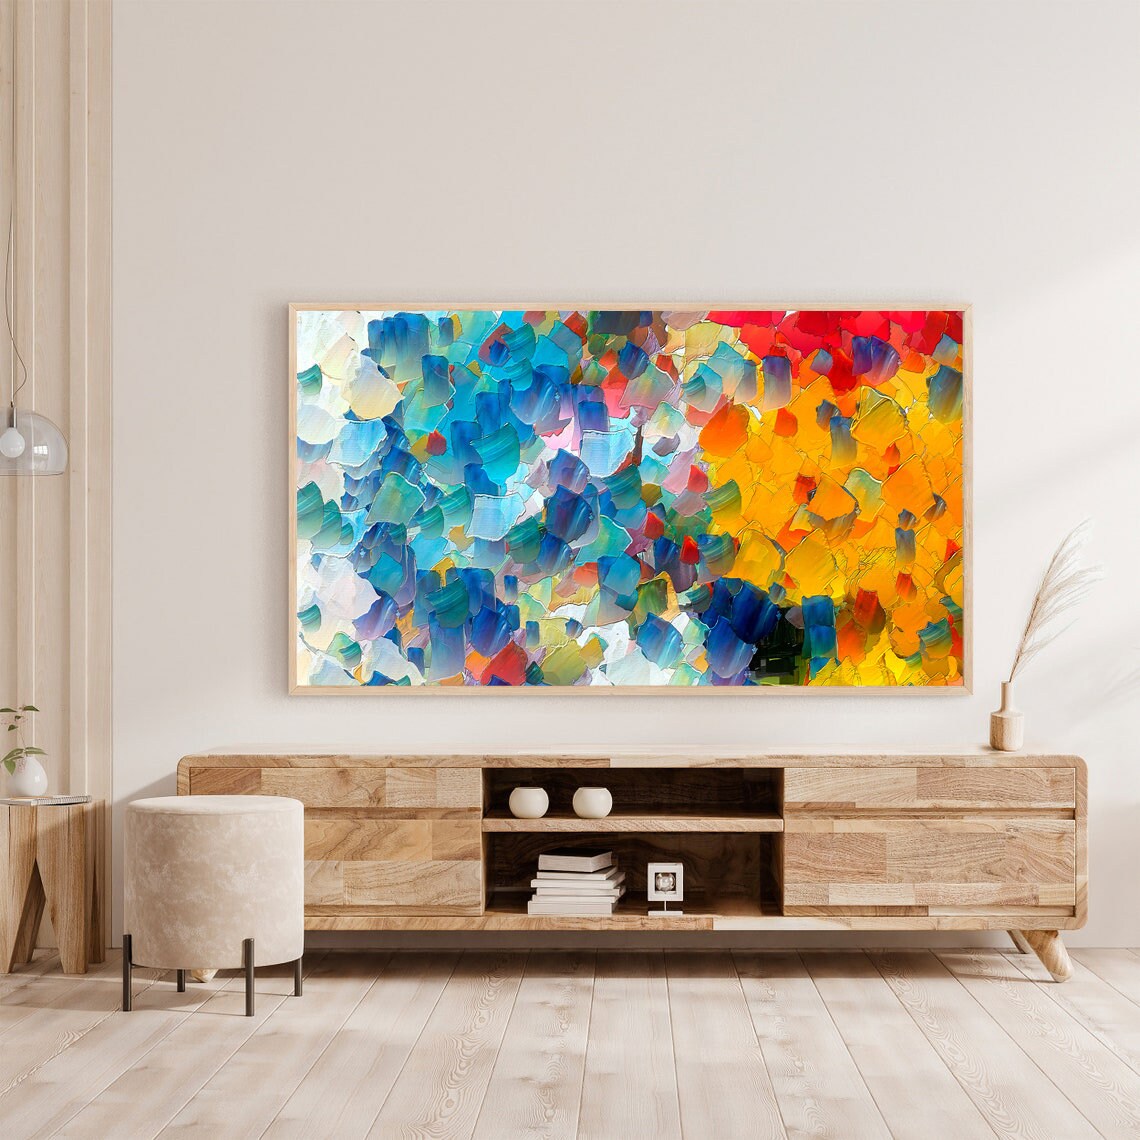 Abstract Samsung Frame TV Art With Primary Colors Frame TV - Etsy